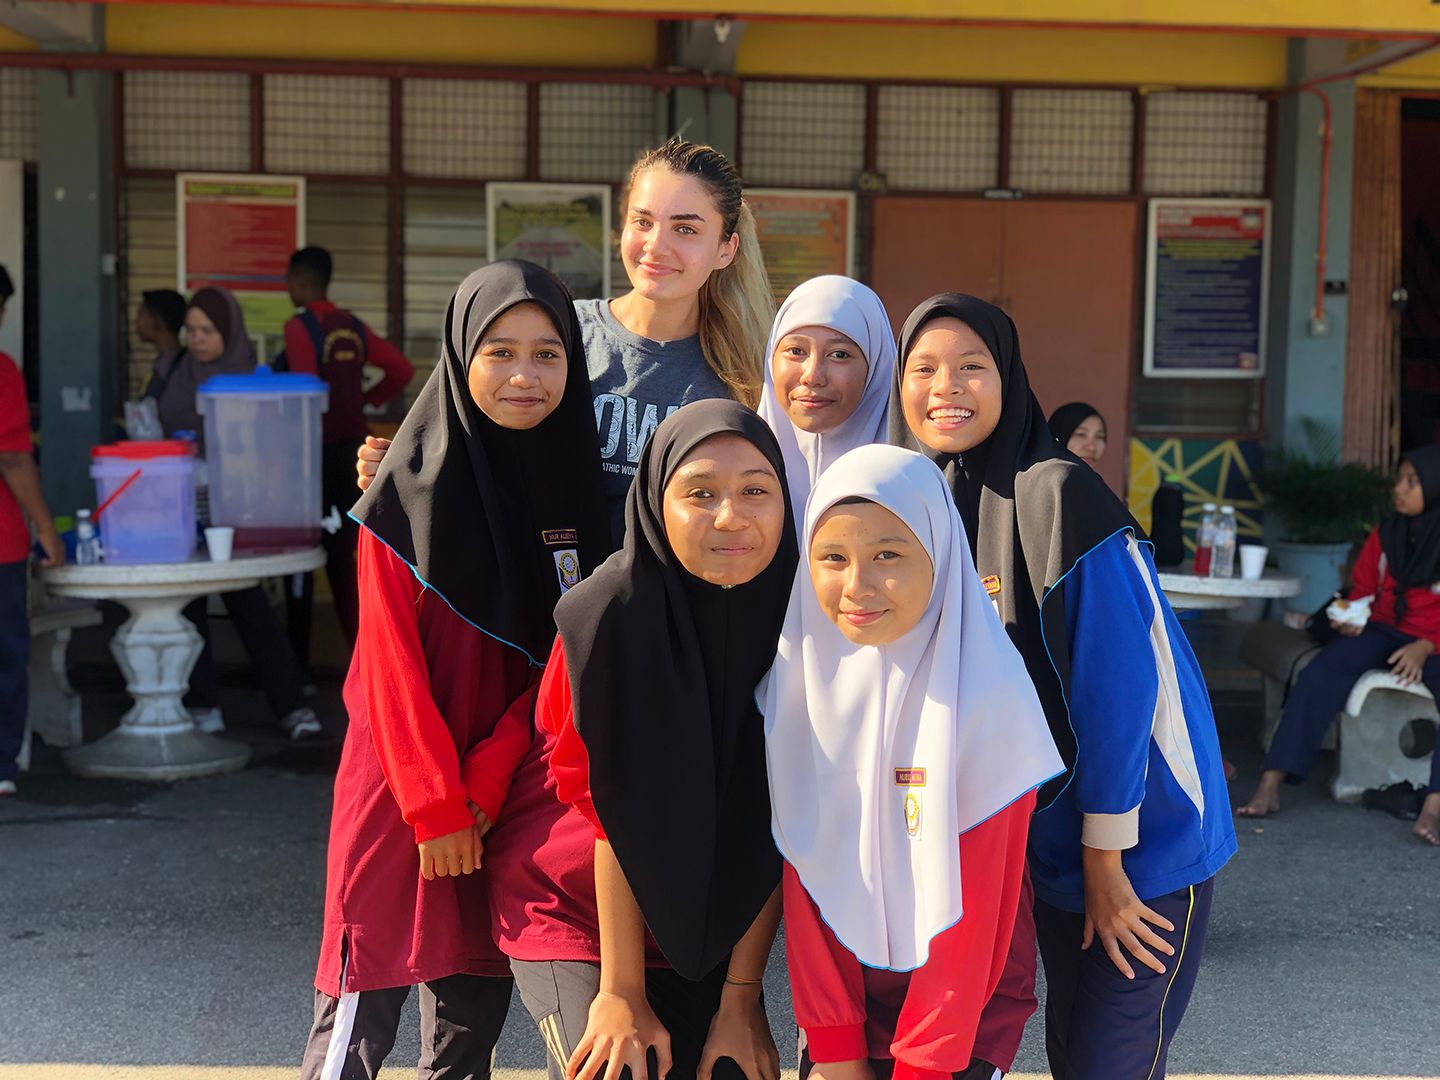 Jana smiling with 5 students